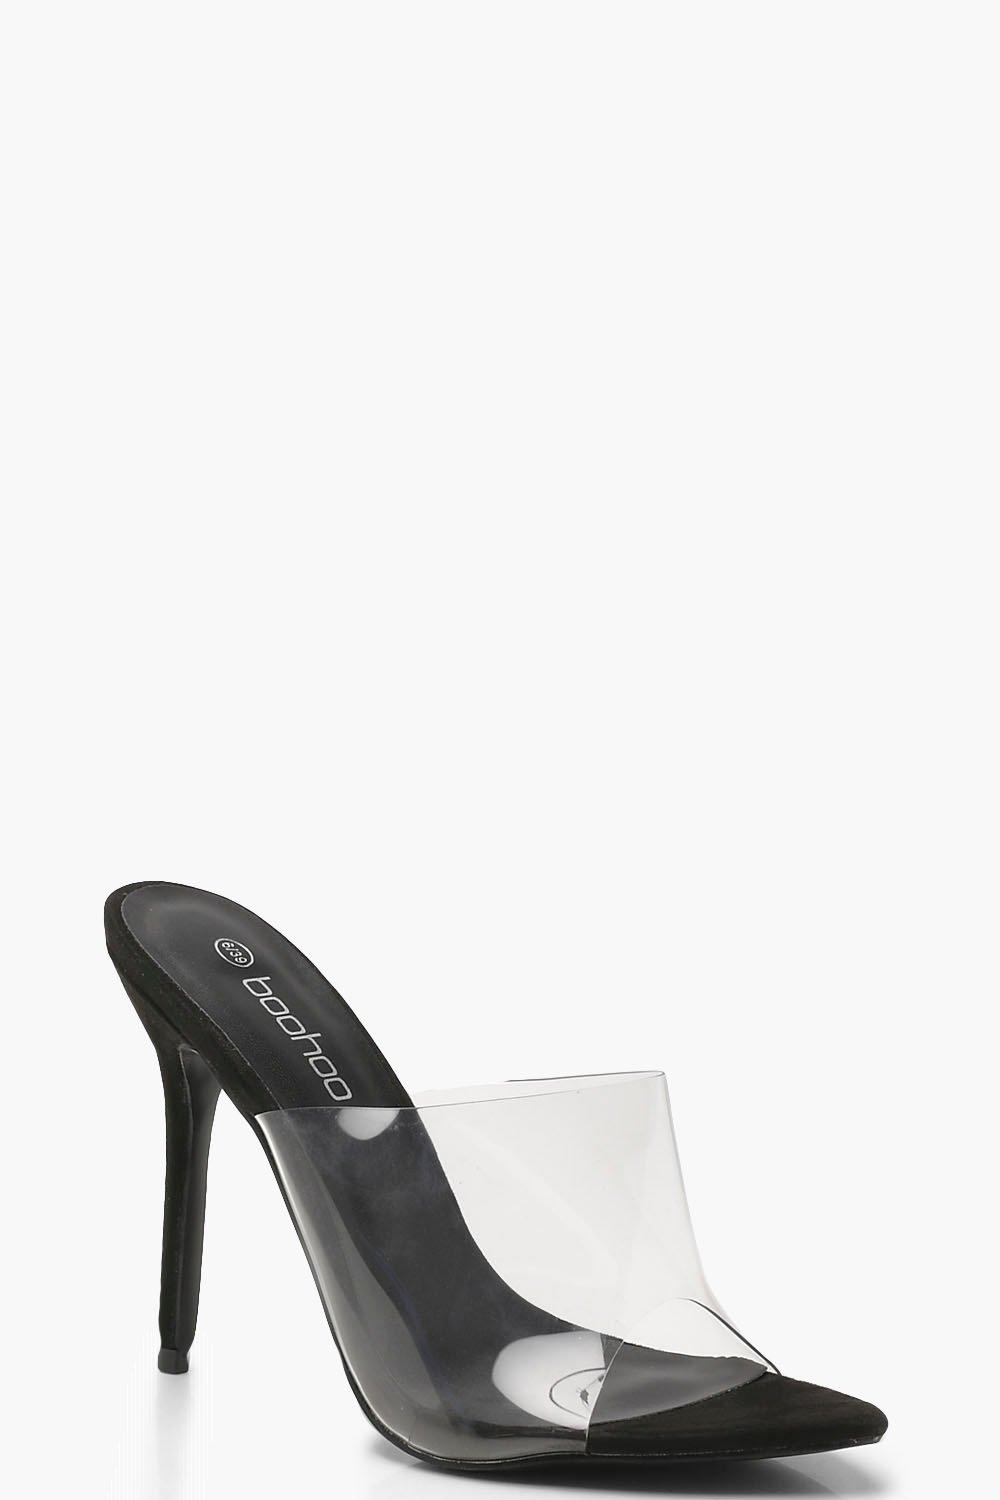 clear black pointy heels